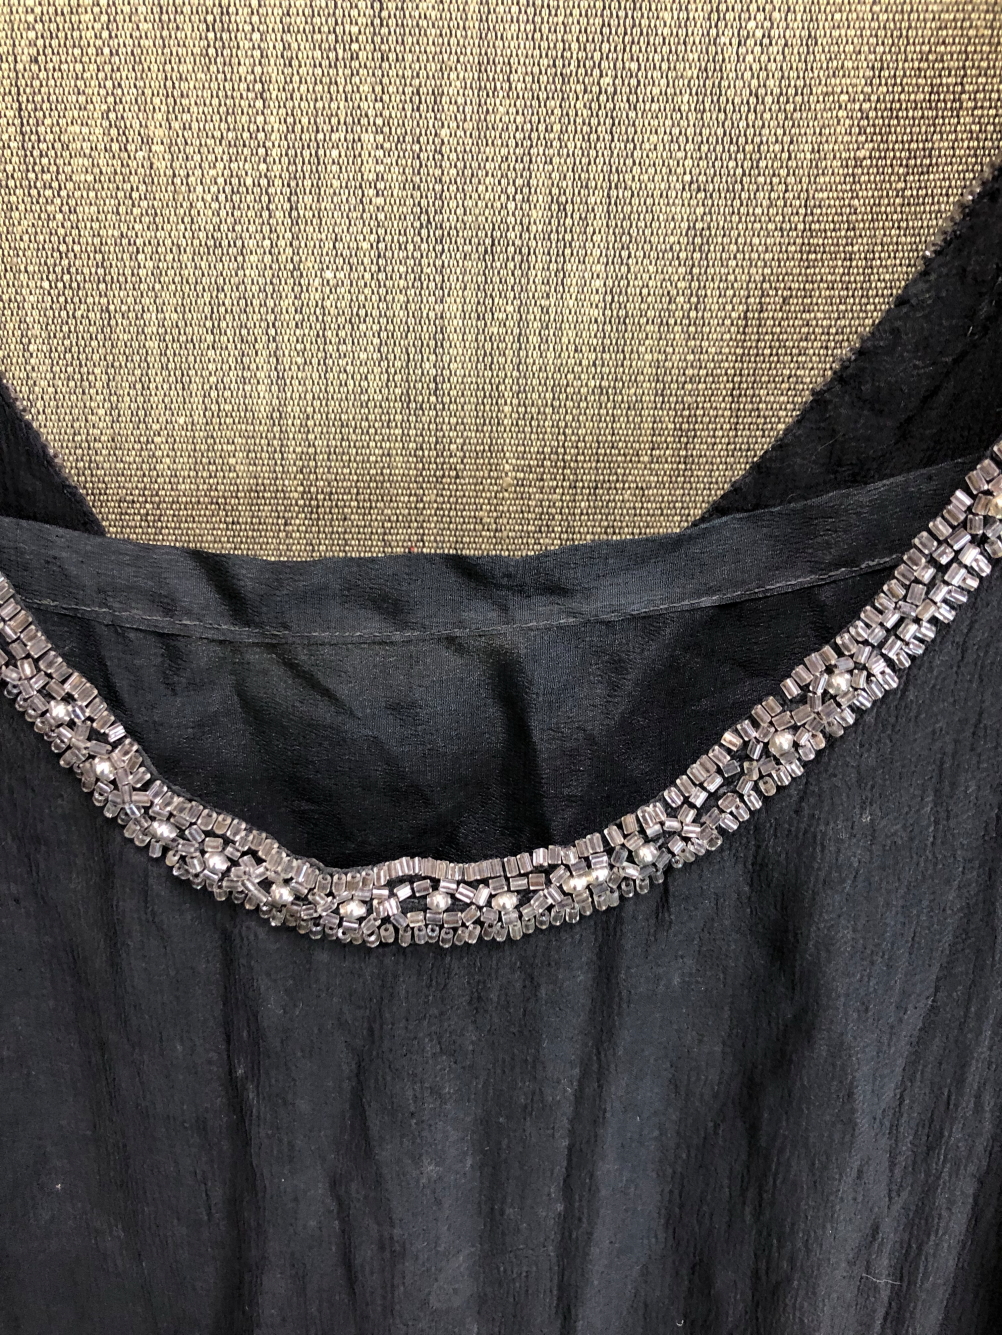 A MID CENTURY FLAPPER DRESS WITH BEADWORK ACCENTS TOGETHER WITH AN ANTIQUE 1920'S JANTZEN BLACK - Image 7 of 22